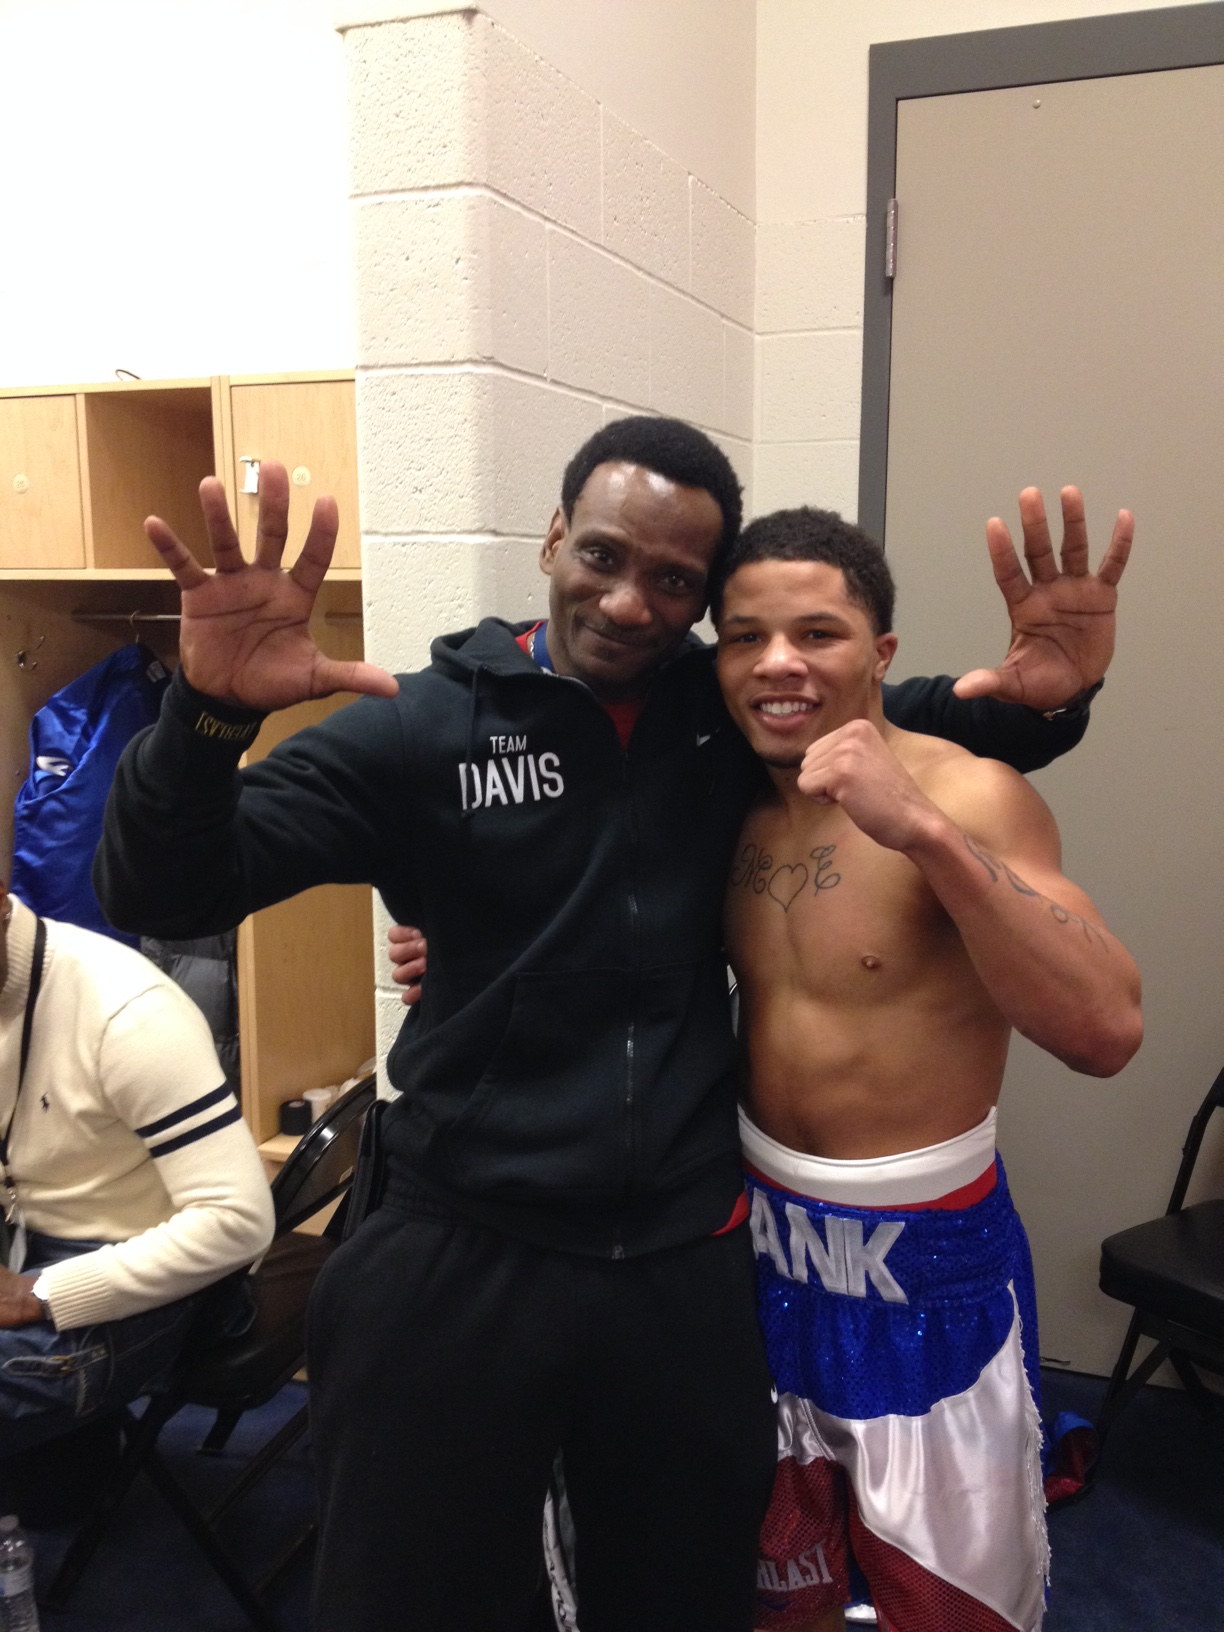 UNDEFEATED BALTIMORE BOXER GERVONTA “TANK” DAVIS WINS HIS 10th PRO FIGHT BY KO IN ...